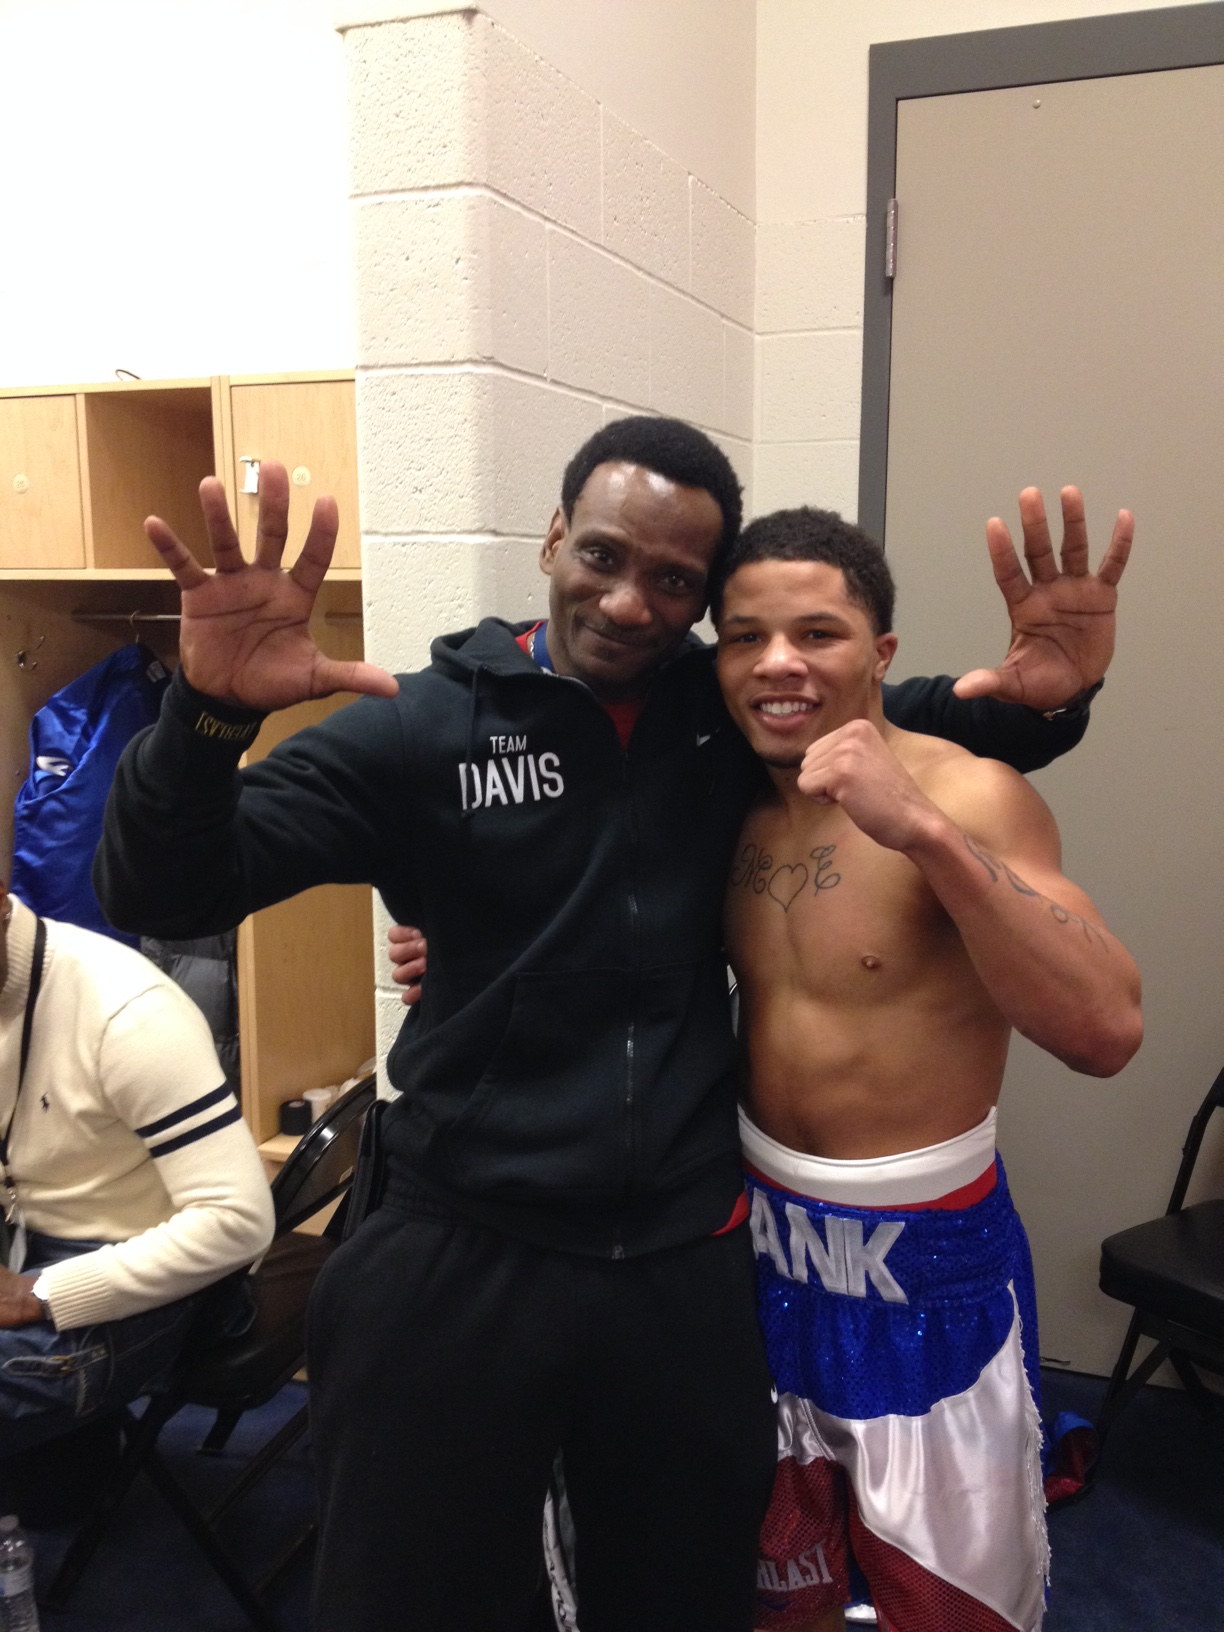 UNDEFEATED BALTIMORE BOXER GERVONTA “TANK” DAVIS WINS HIS 10th PRO FIGHT BY KO IN ...